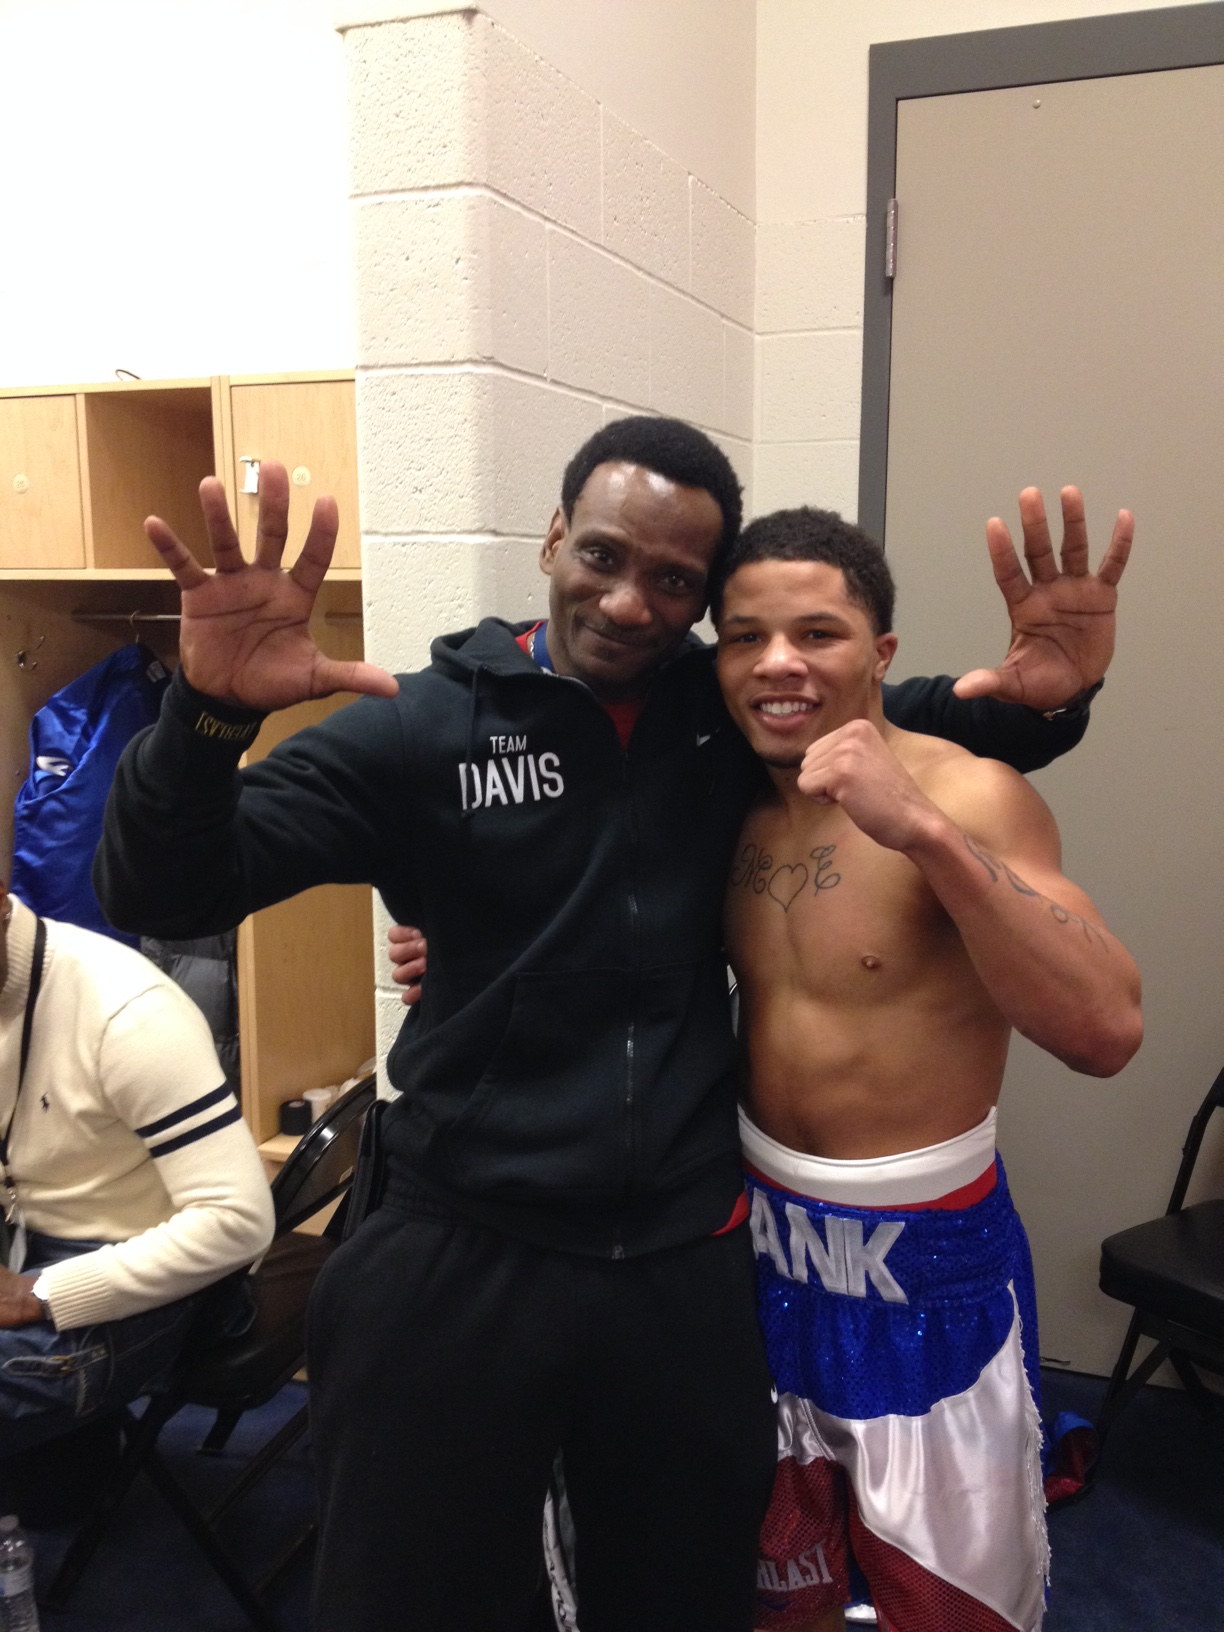 UNDEFEATED BALTIMORE BOXER GERVONTA “TANK” DAVIS WINS HIS 10th PRO FIGHT BY KO IN ...